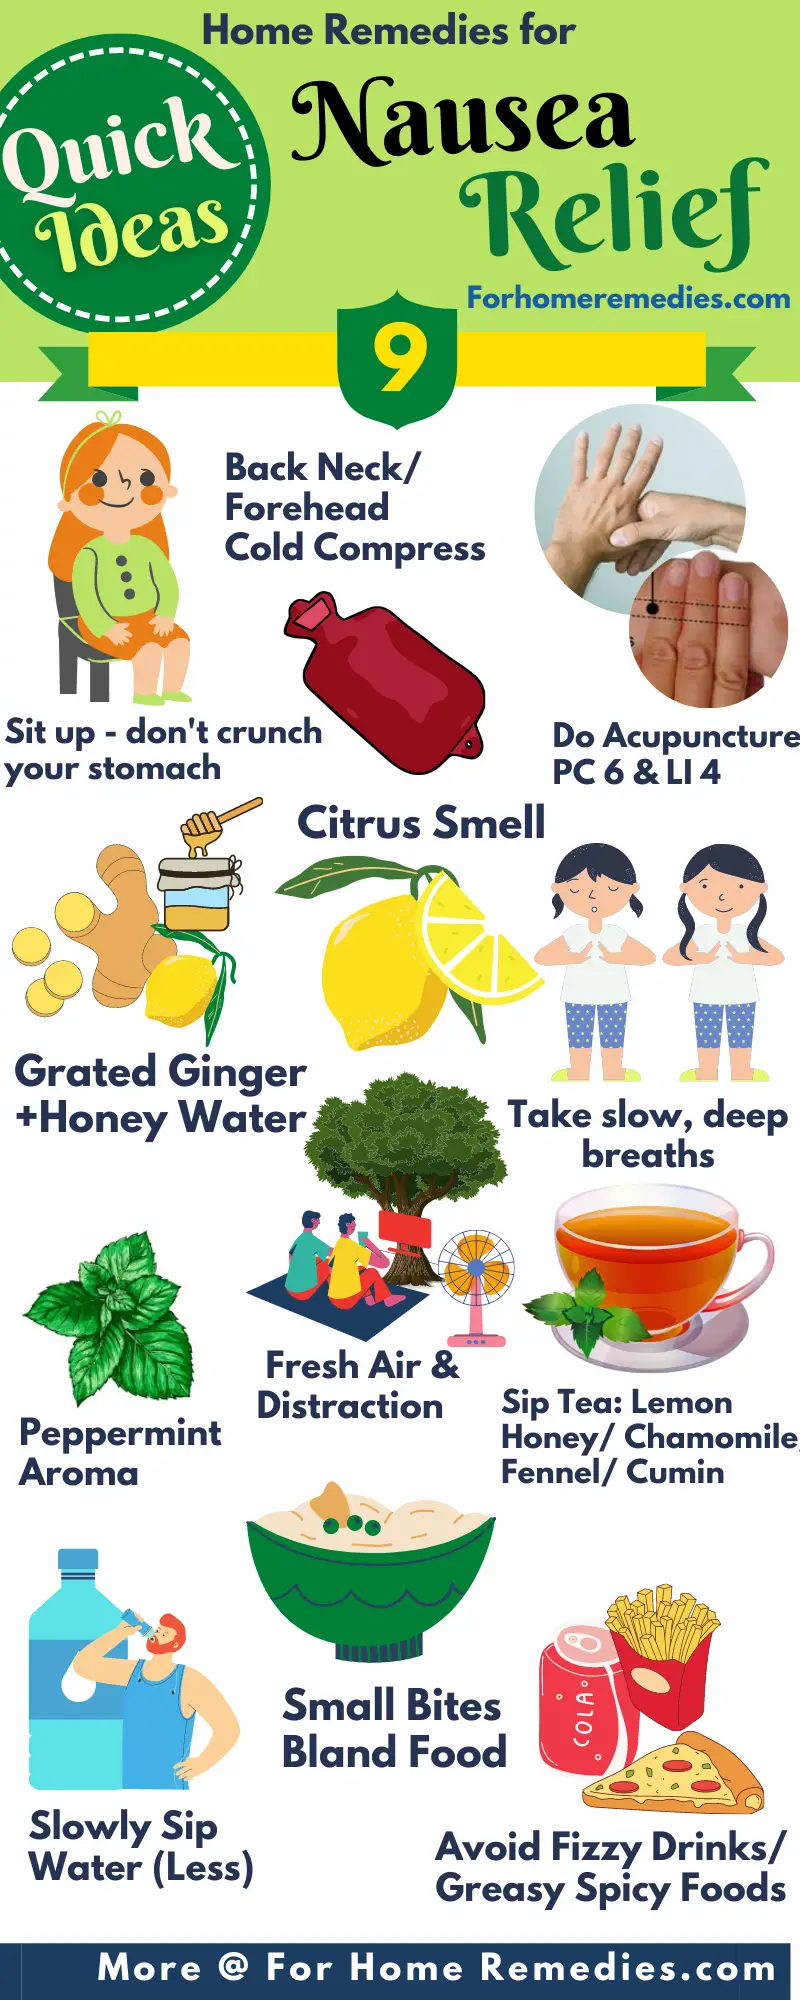 Nausea Instant Quick Relief - Home Remedies to Get Rid of Nausea